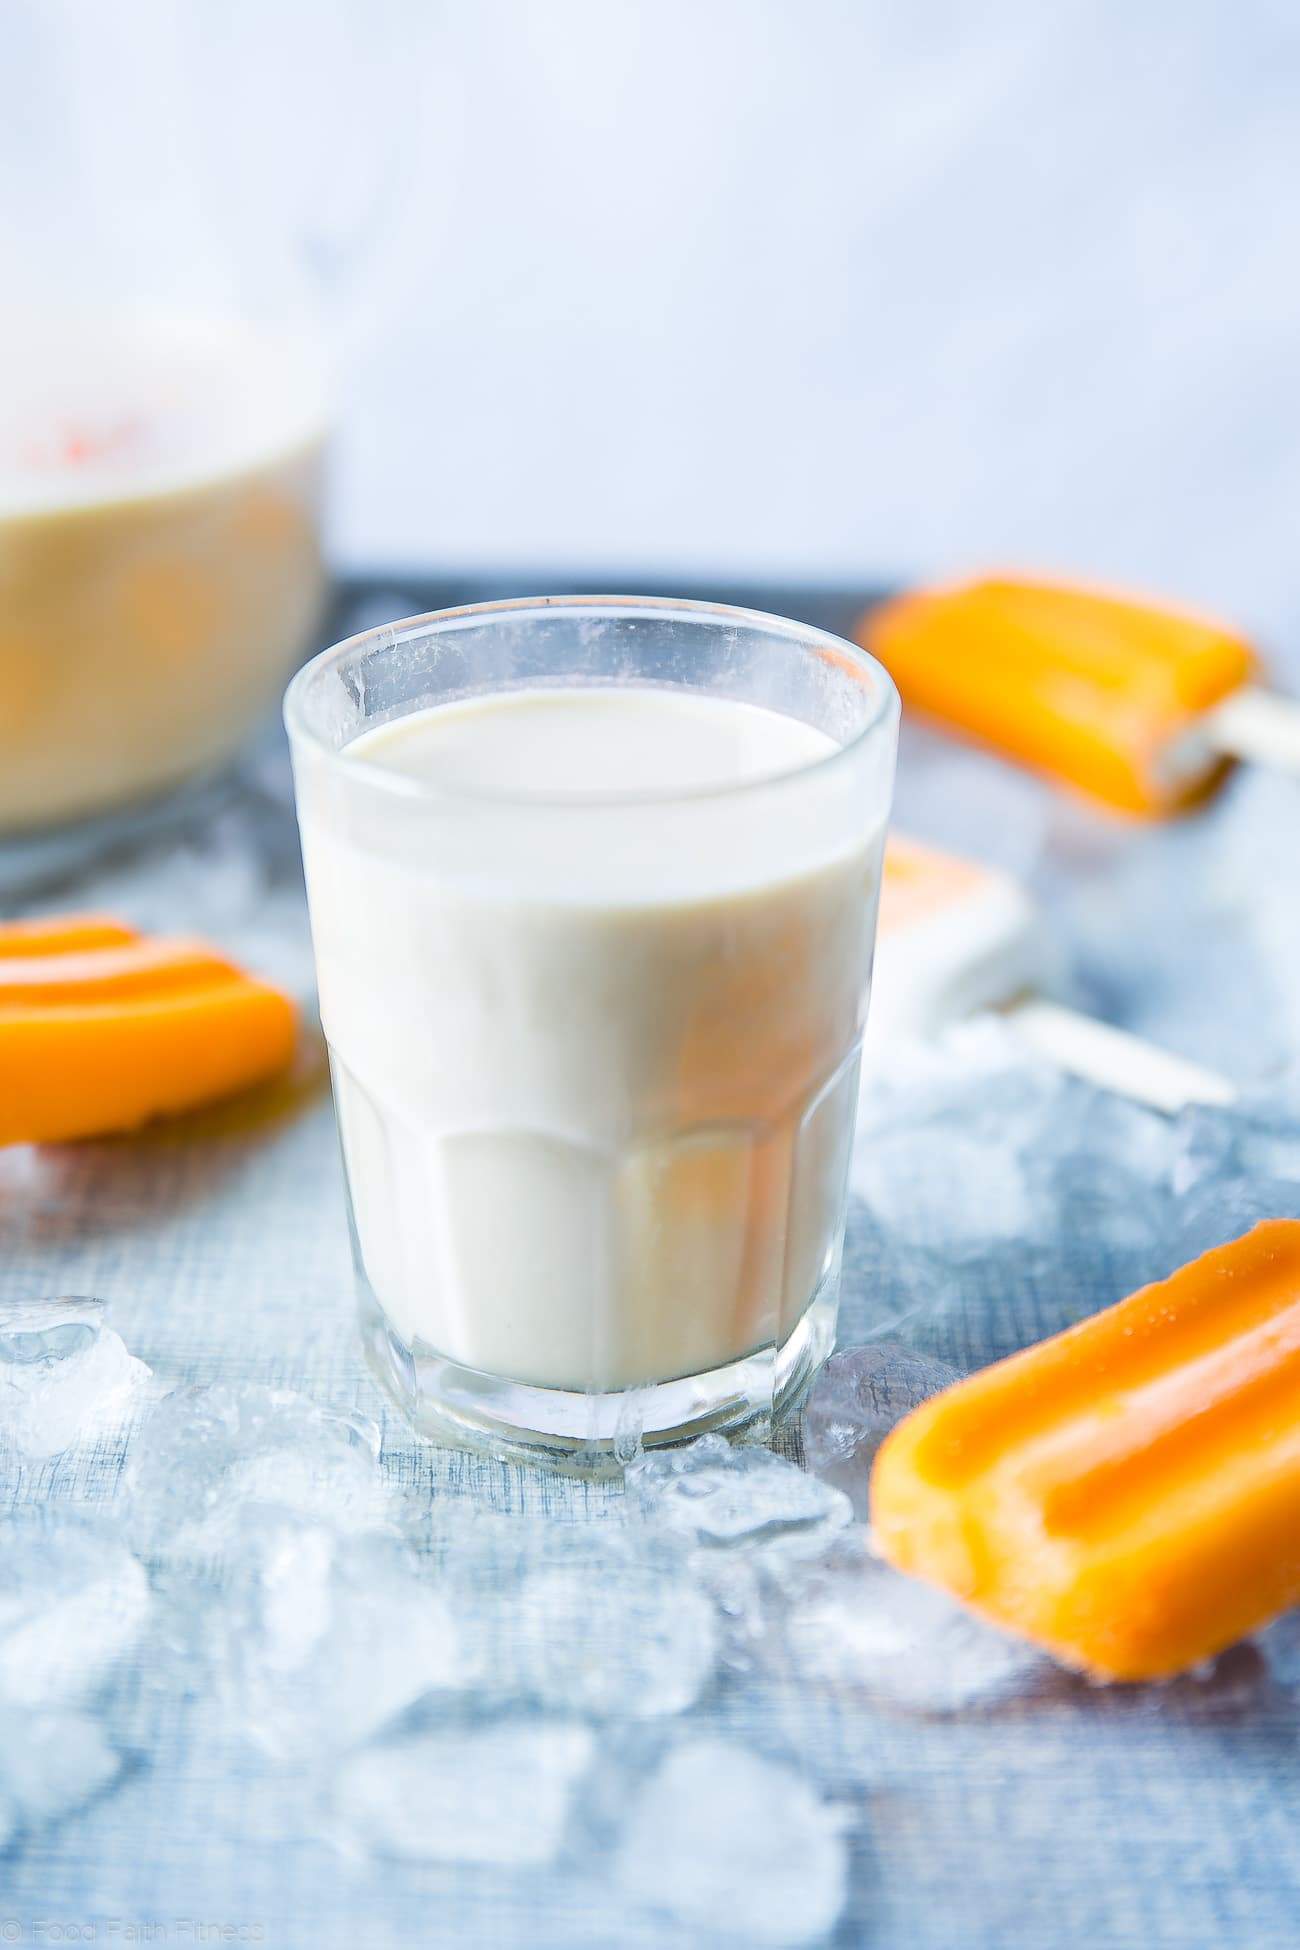 Creamsicle Cashew Milk - This quick and easy, 4 ingredient homemade cashew milk recipe tastes like a creamsicle! It's a paleo, vegan and whole30 compliant drink that tastes better than store bought! | Foodfaithfitness.com | @FoodFaithFit